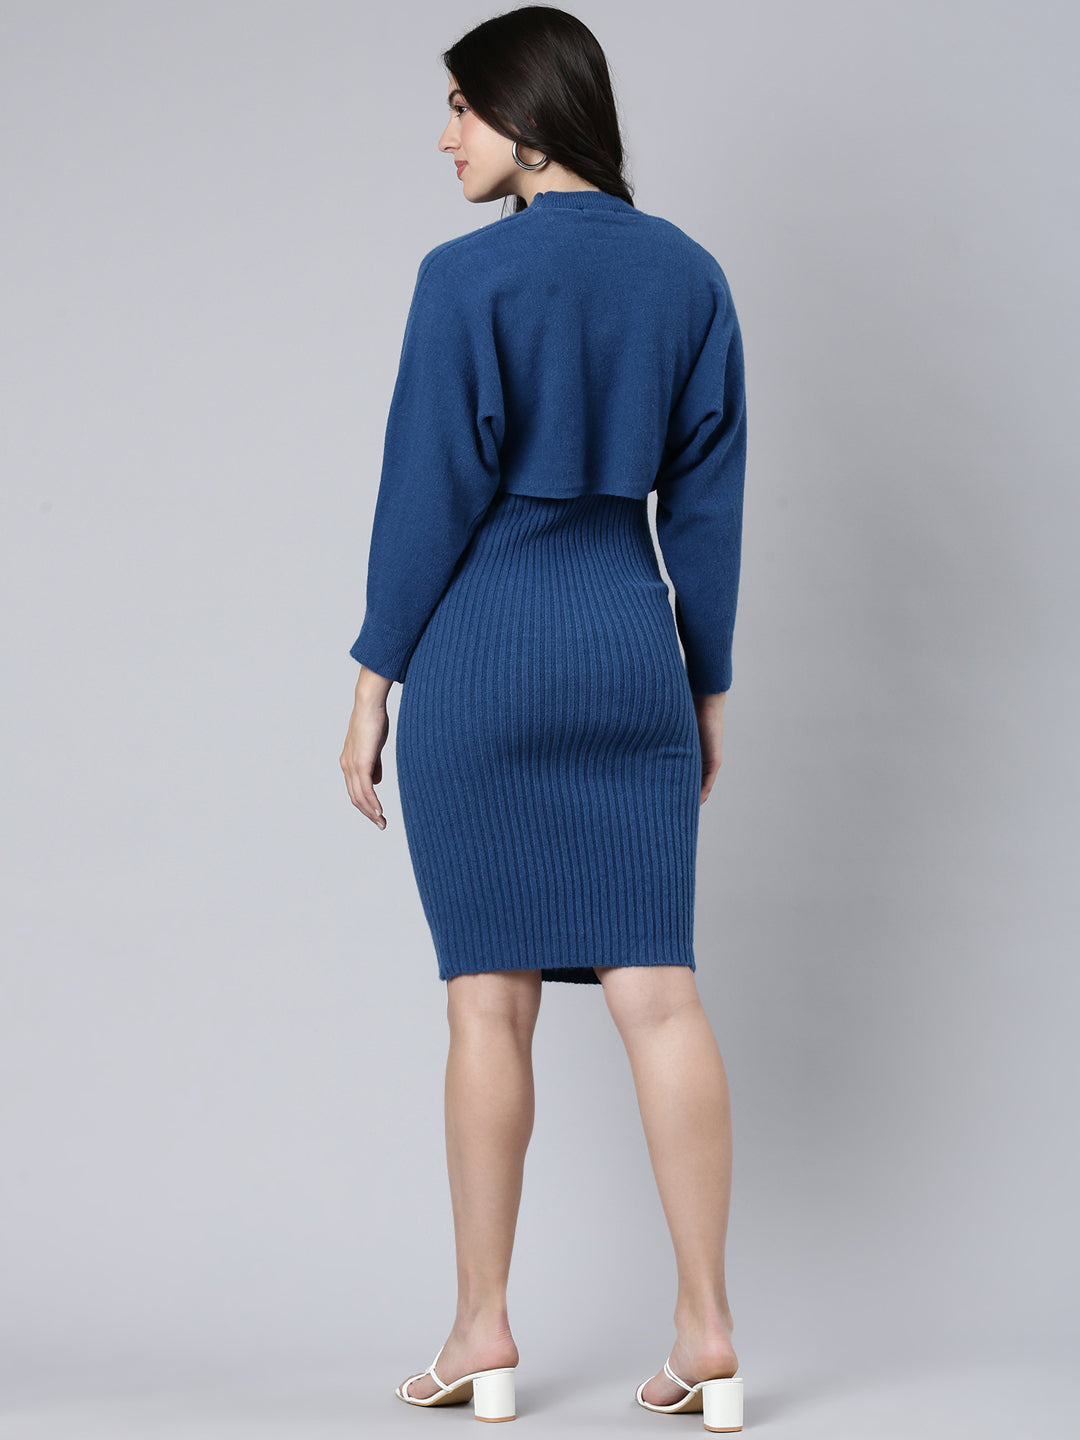 Women Self Design Blue Bodycon Dress Comes with Top